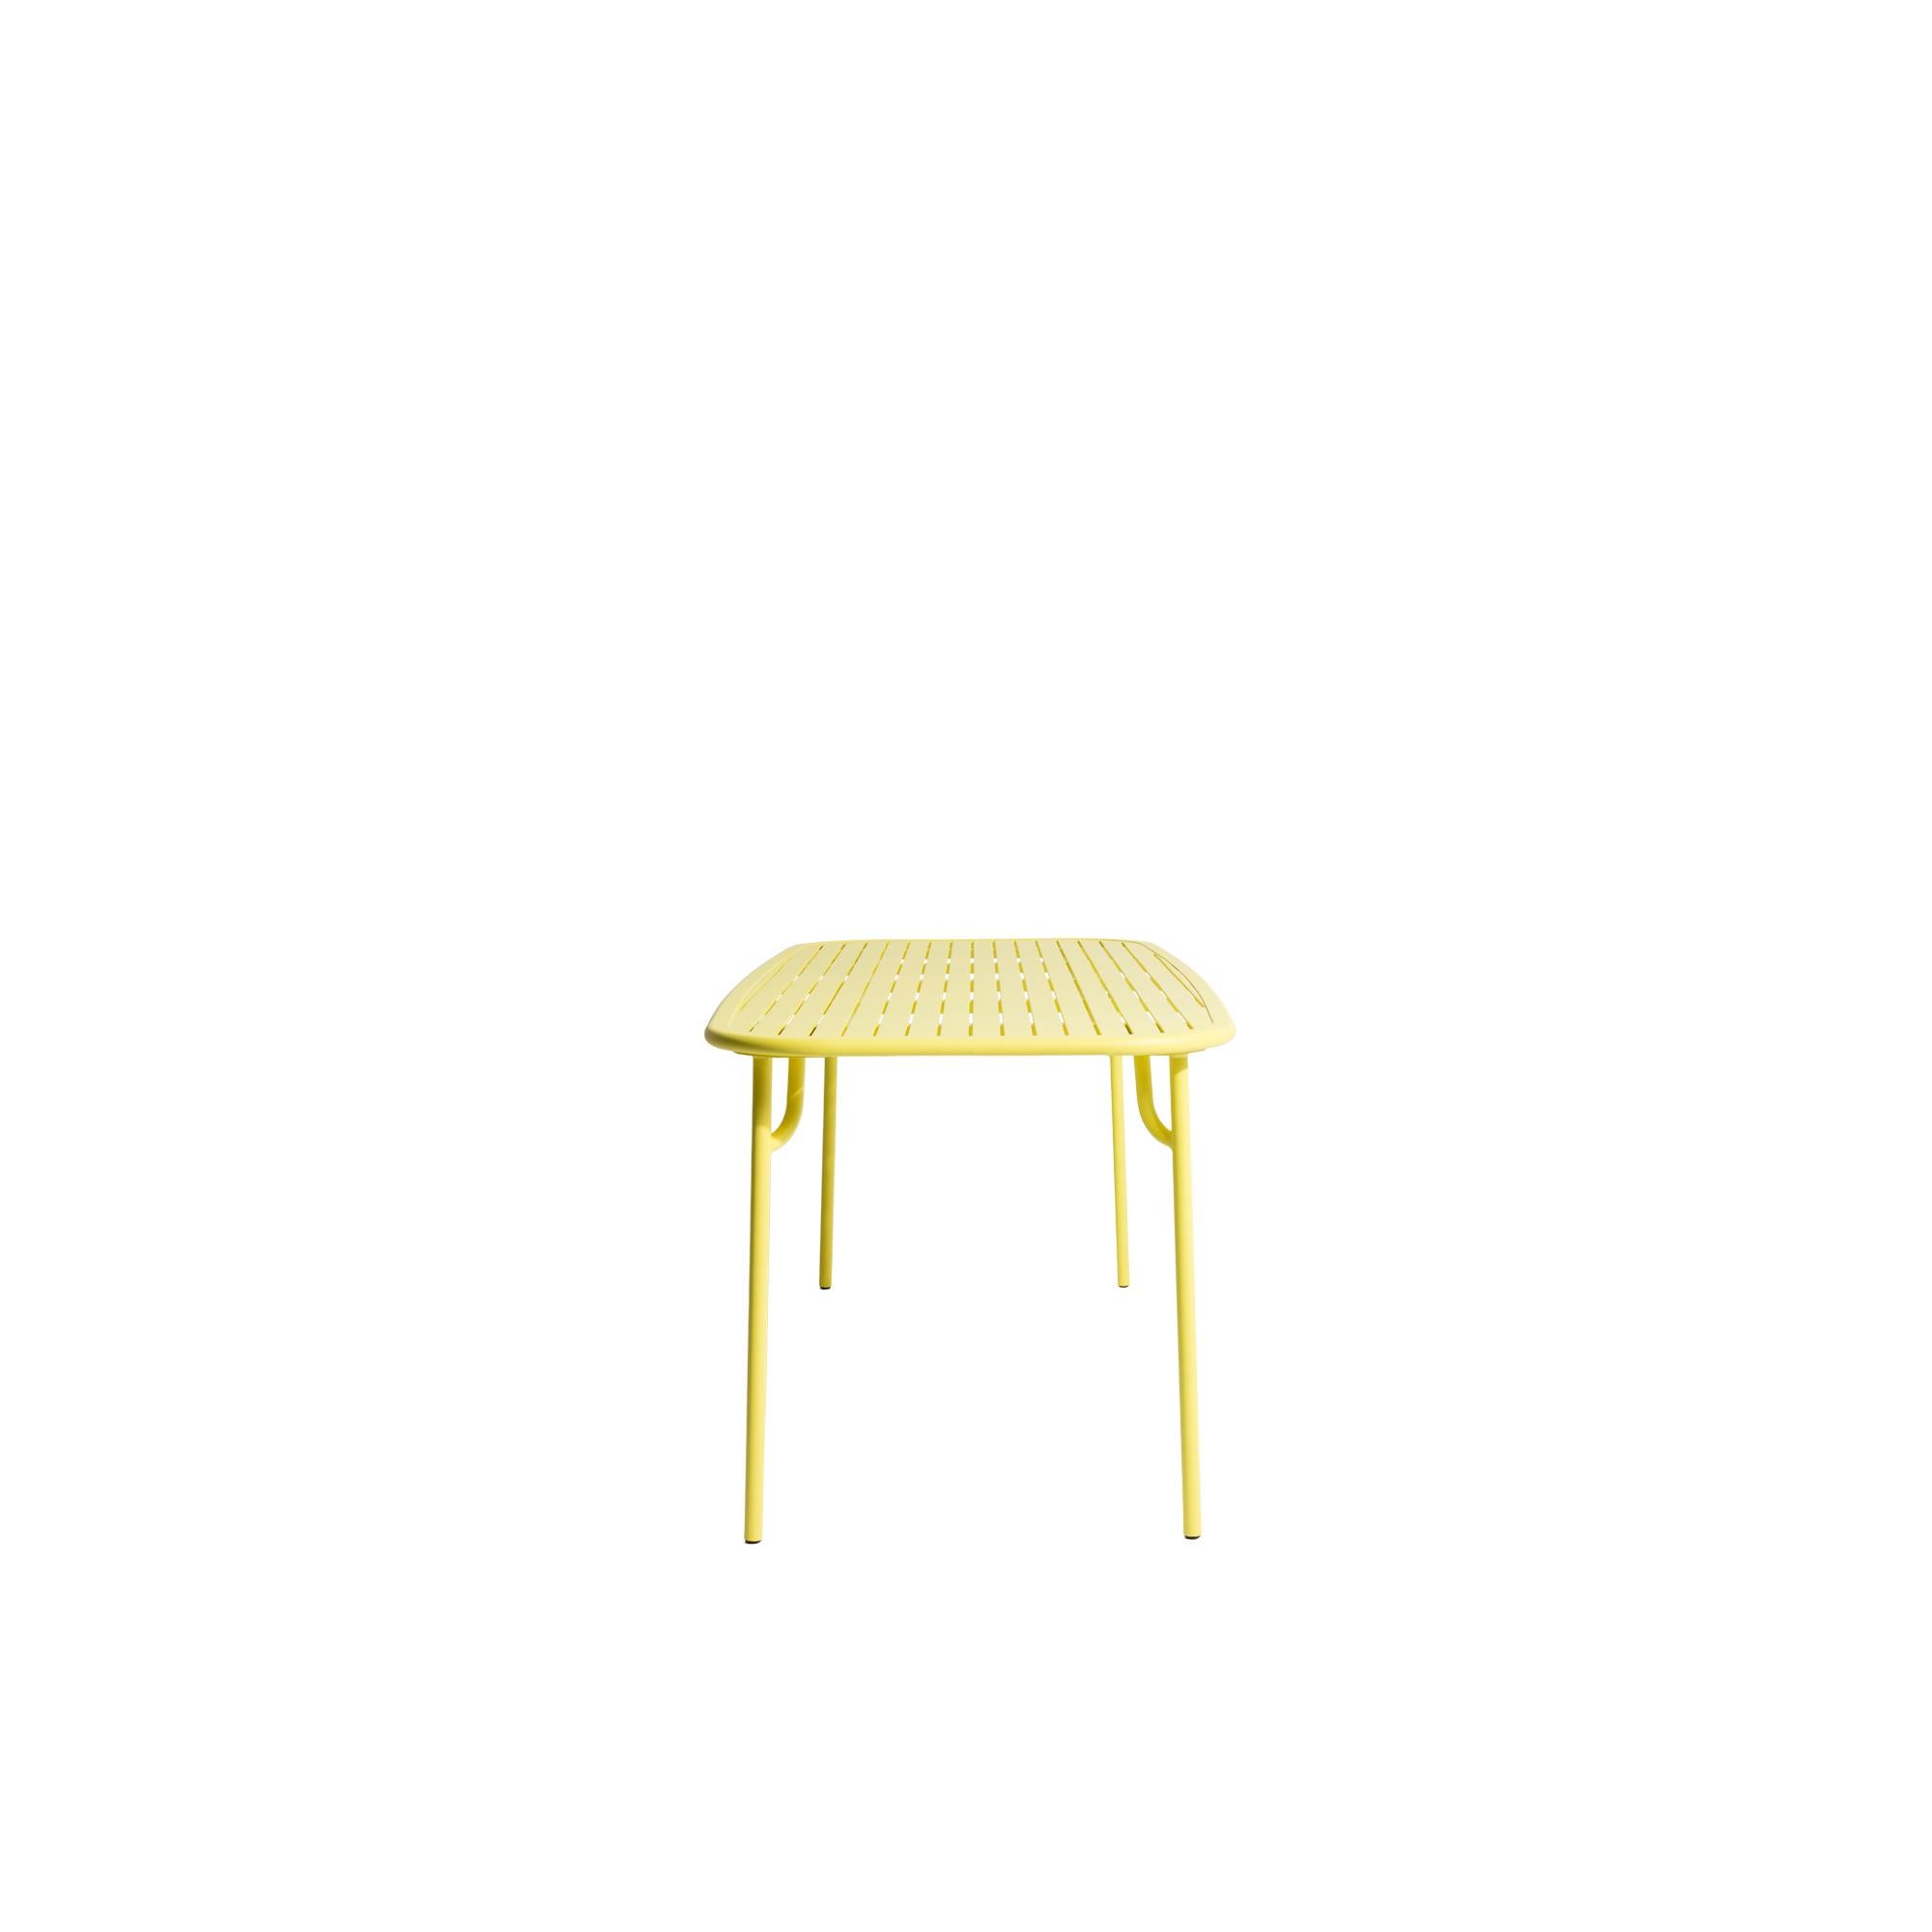 Petite Friture Week-End Medium Rectangular Dining Table in Yellow Aluminium with Slats by Studio BrichetZiegler, 2017

The week-end collection is a full range of outdoor furniture, in aluminium grained epoxy paint, matt finish, that includes 18